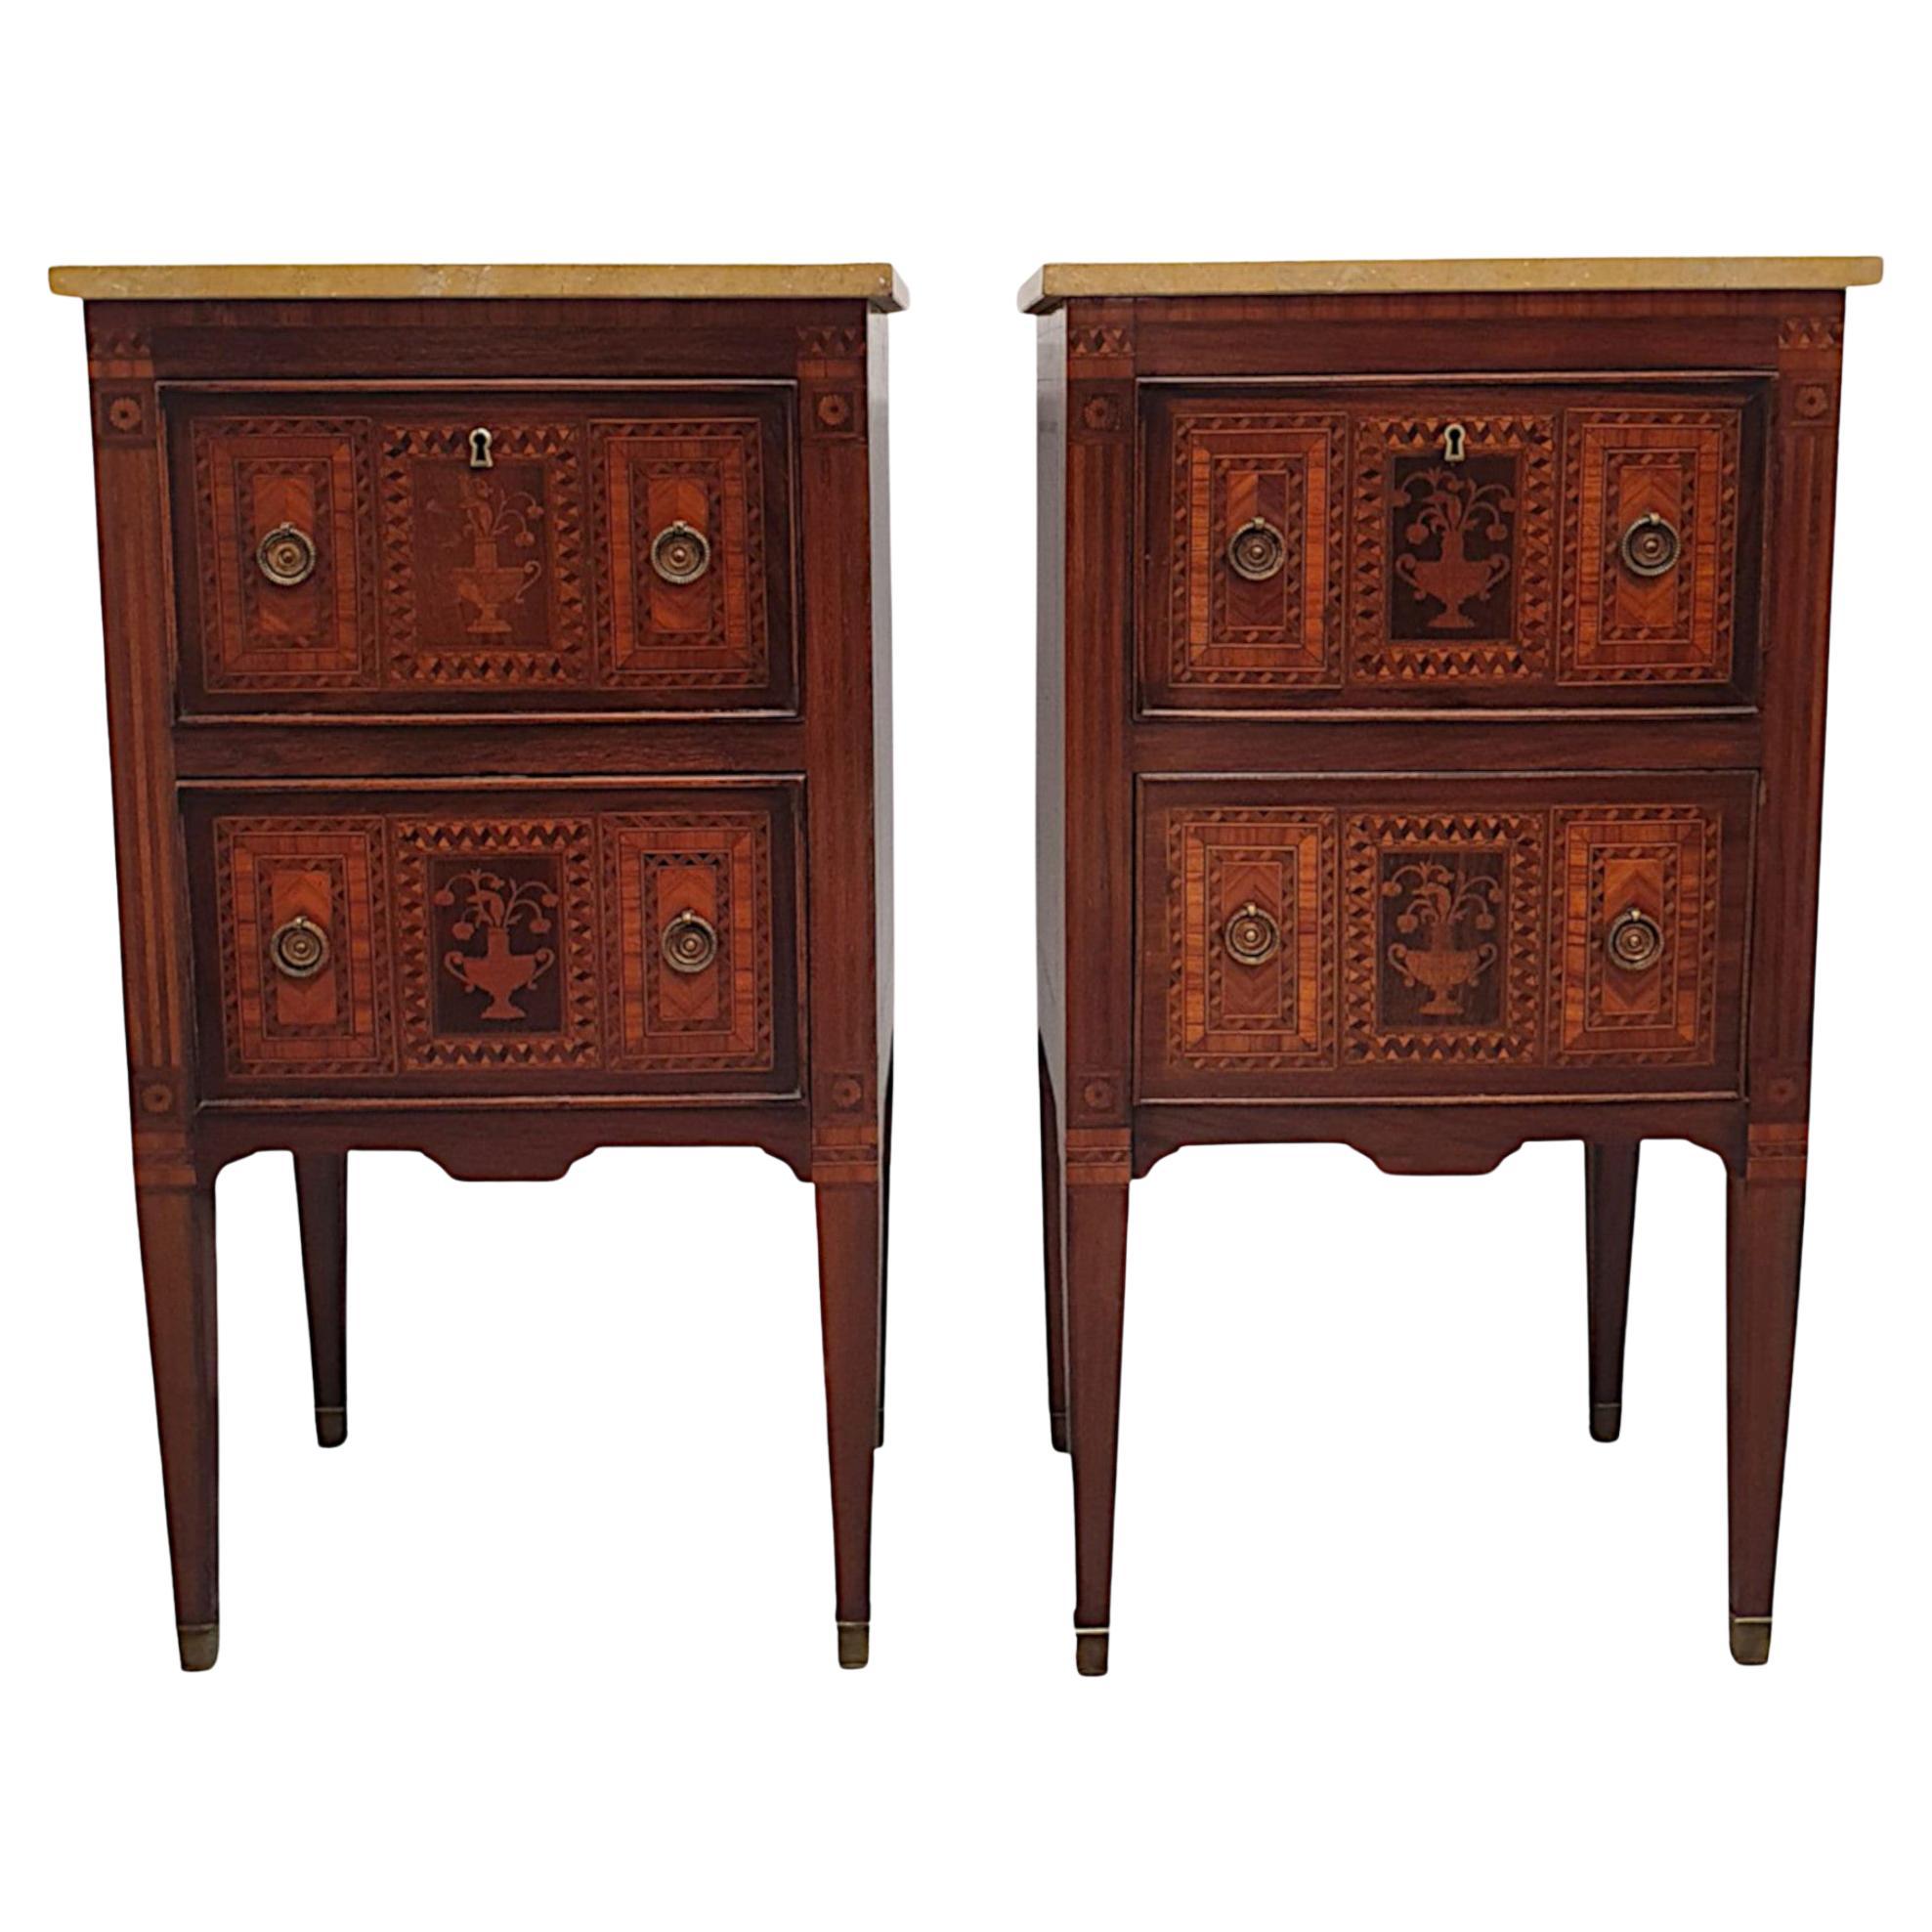 A Fine Pair of Early 20th Century Highly Inlaid Marble Top Bedside Chests For Sale